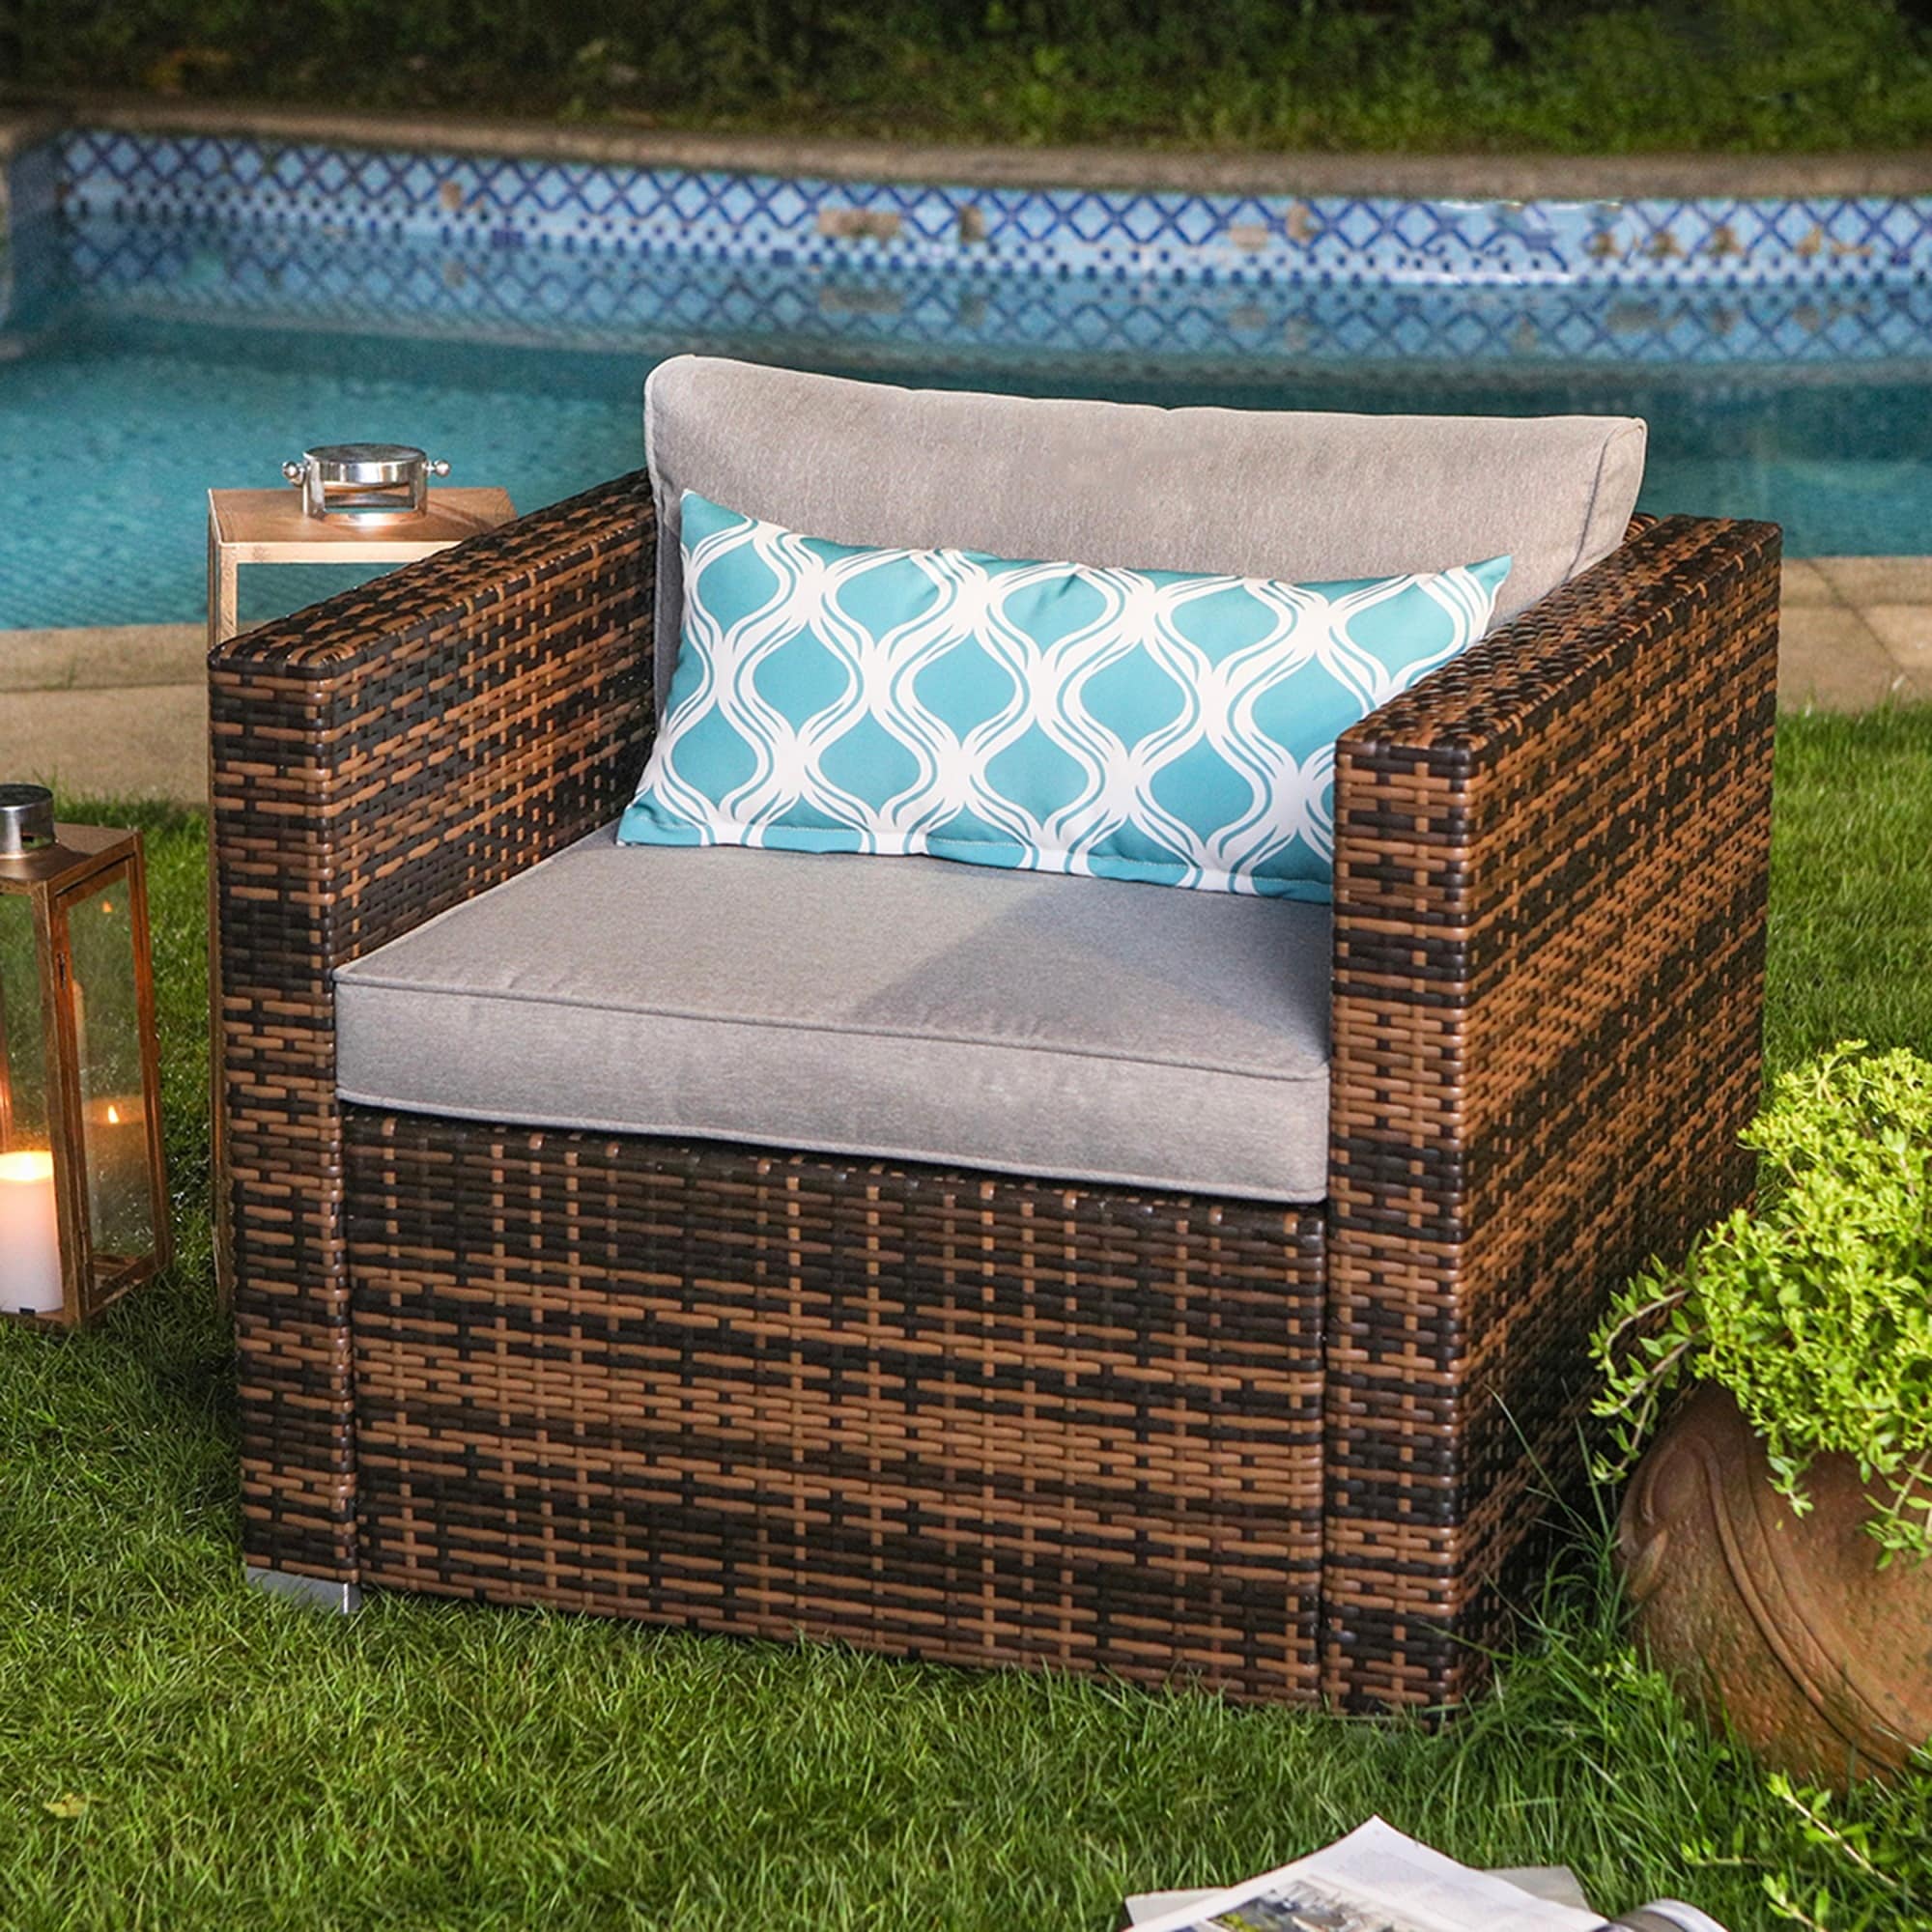 Cosiest Outdoor Furniture Wicker Single Chair With Cushions Pillows Overstock 31500496